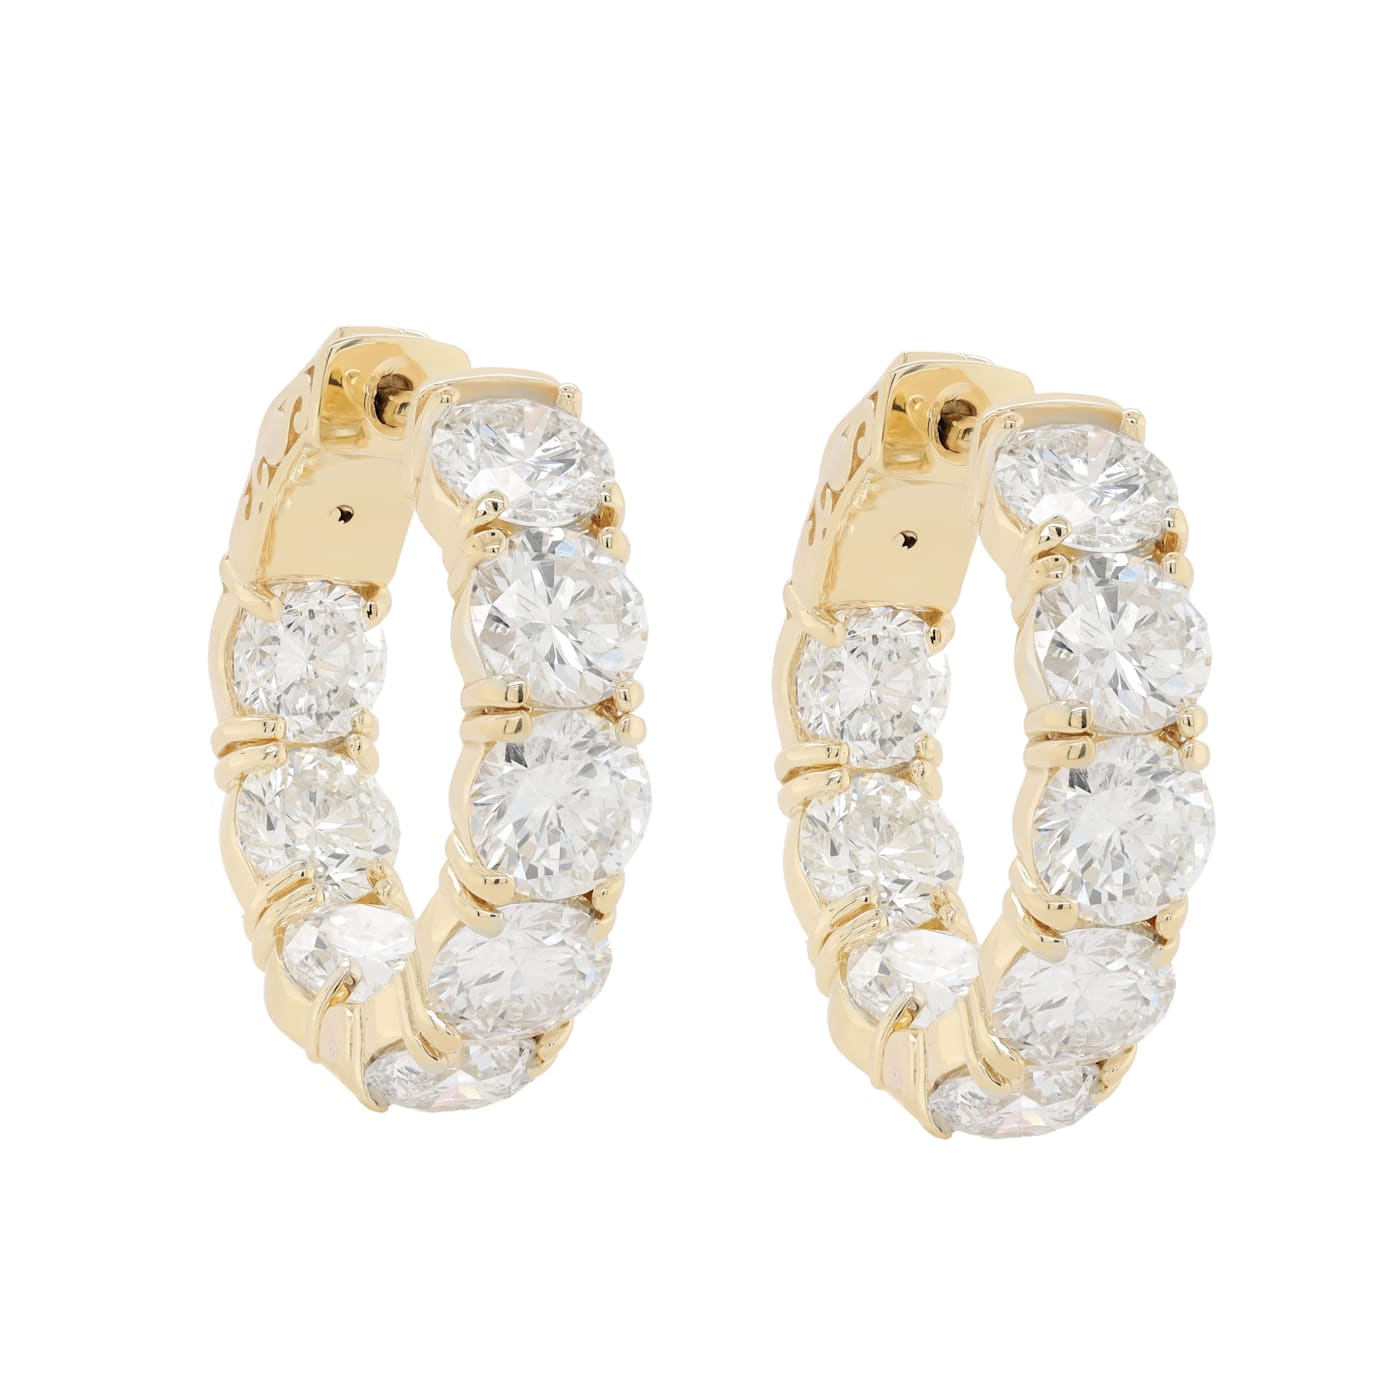 Yellow Gold Filled Thick Flower Engraved Hoops Earrings - Dianna